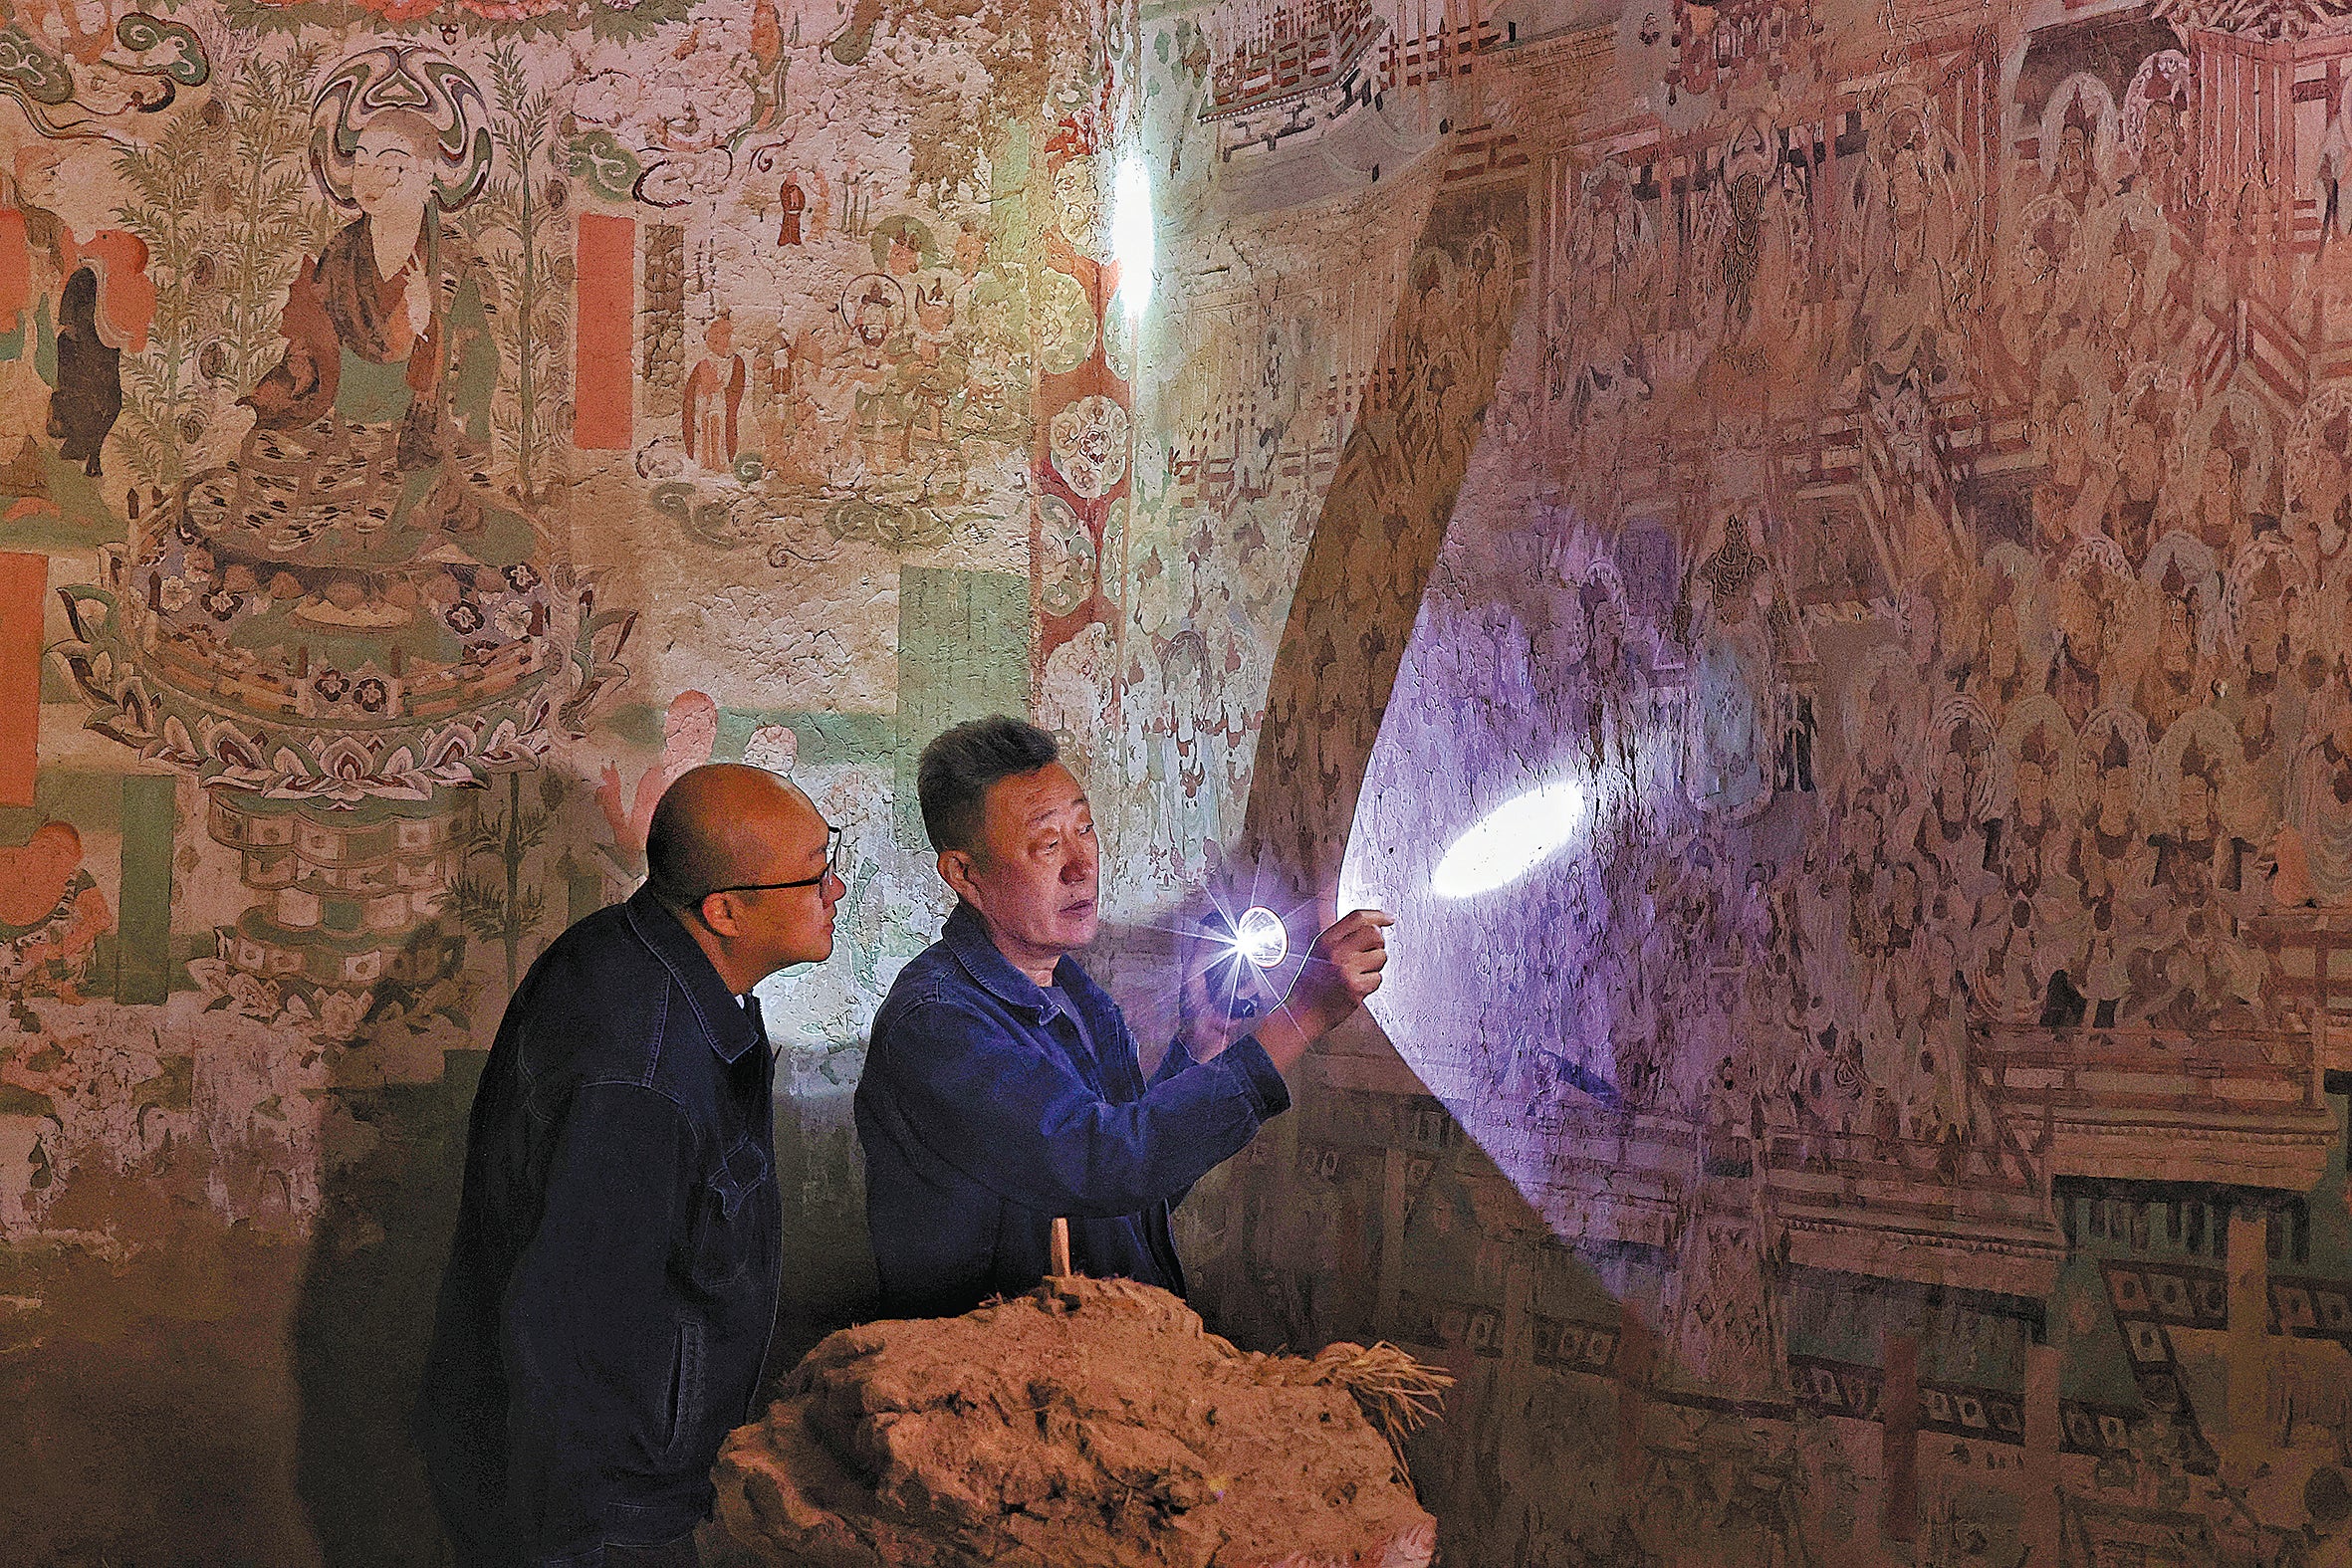 Li Bo (right), a veteran restorer of the Dunhuang Academy, leads a colleague in examining murals in one of the Yulin Caves at Guazhou county near Dunhuang, Gansu province